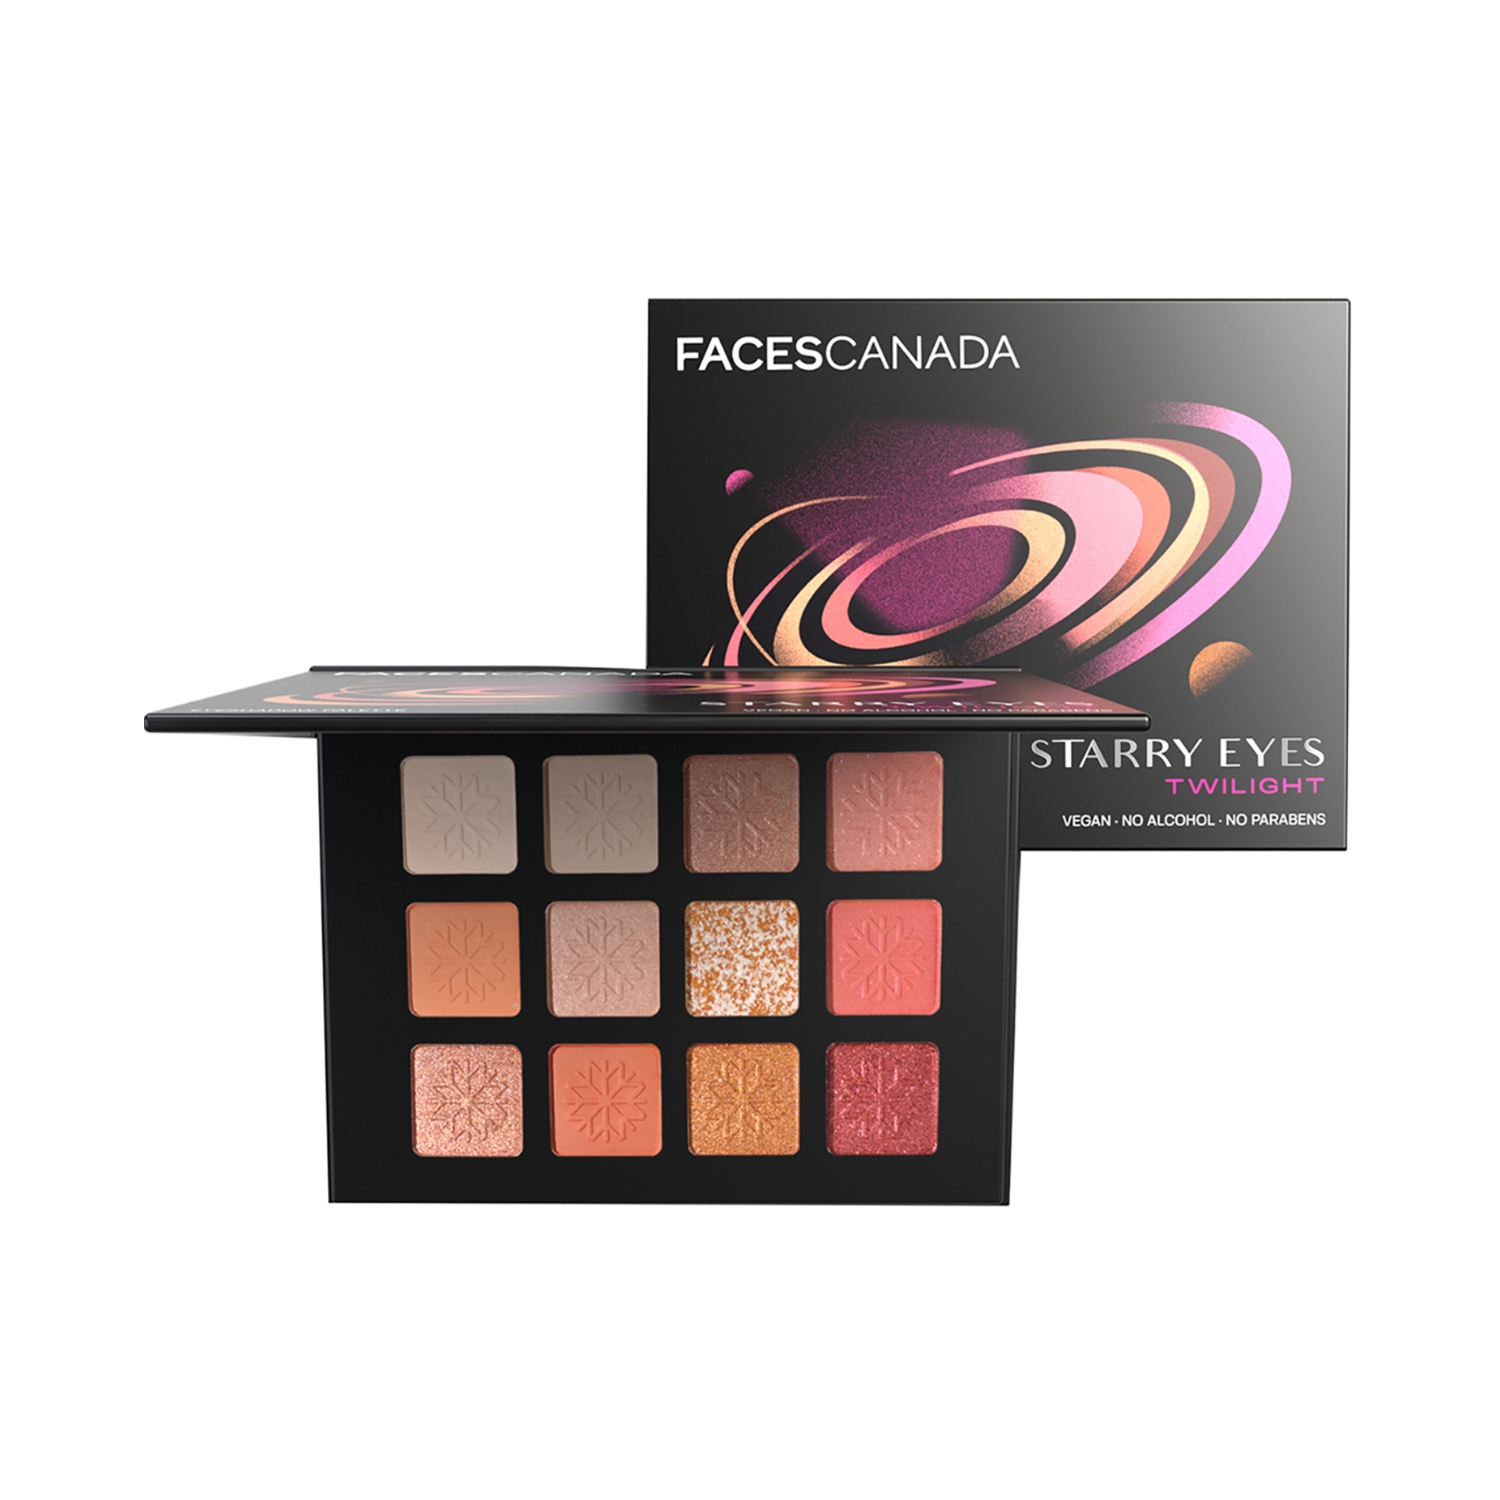 Faces Canada | Faces Canada Starry Eyes Eye Shadow Palette - 02 Twilight (16g)